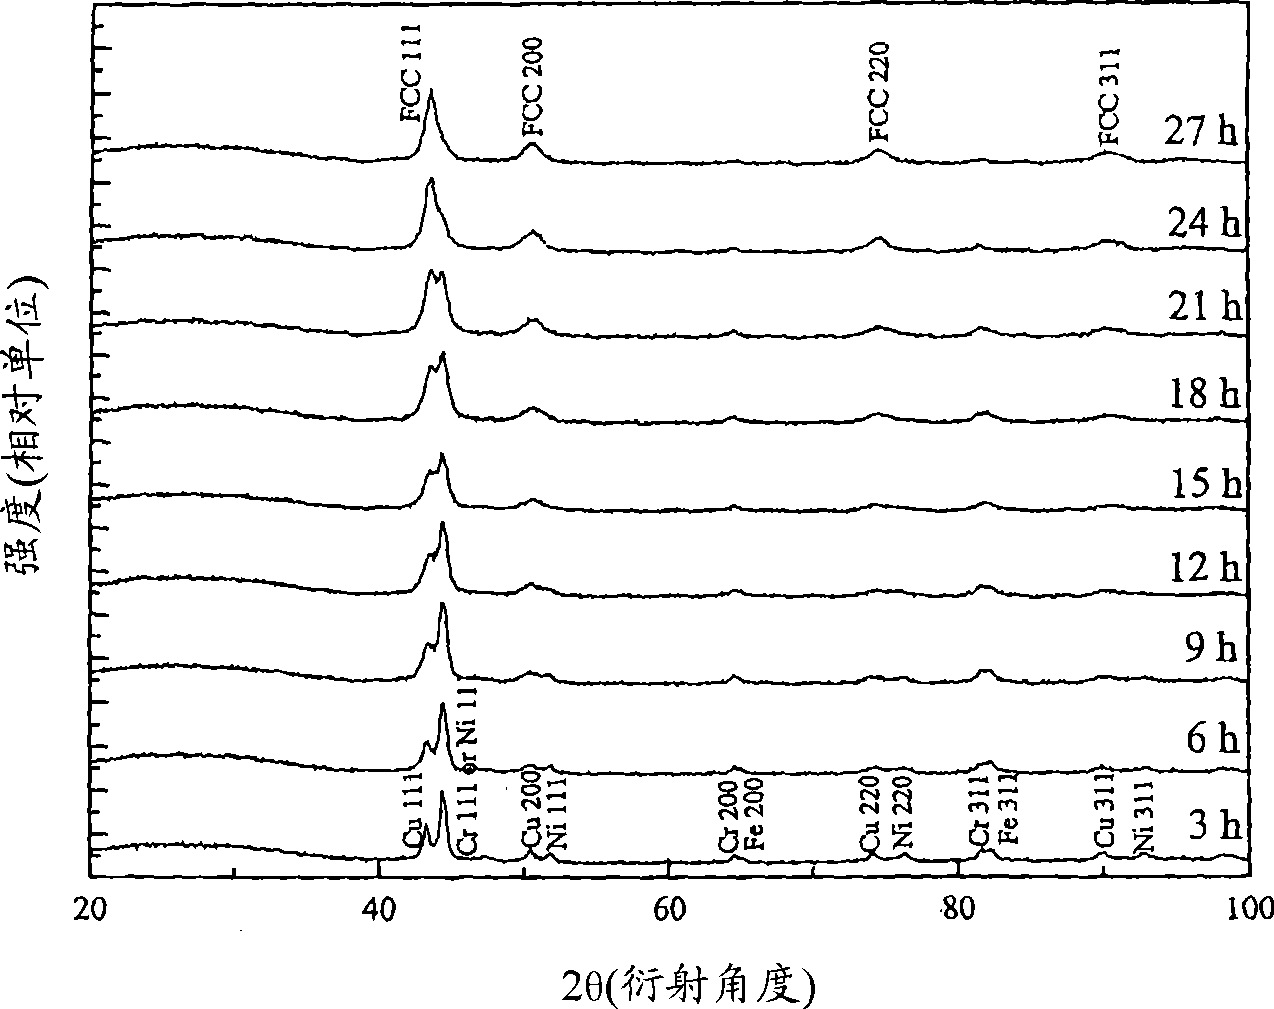 Superhard composite material and method for preparation thereof